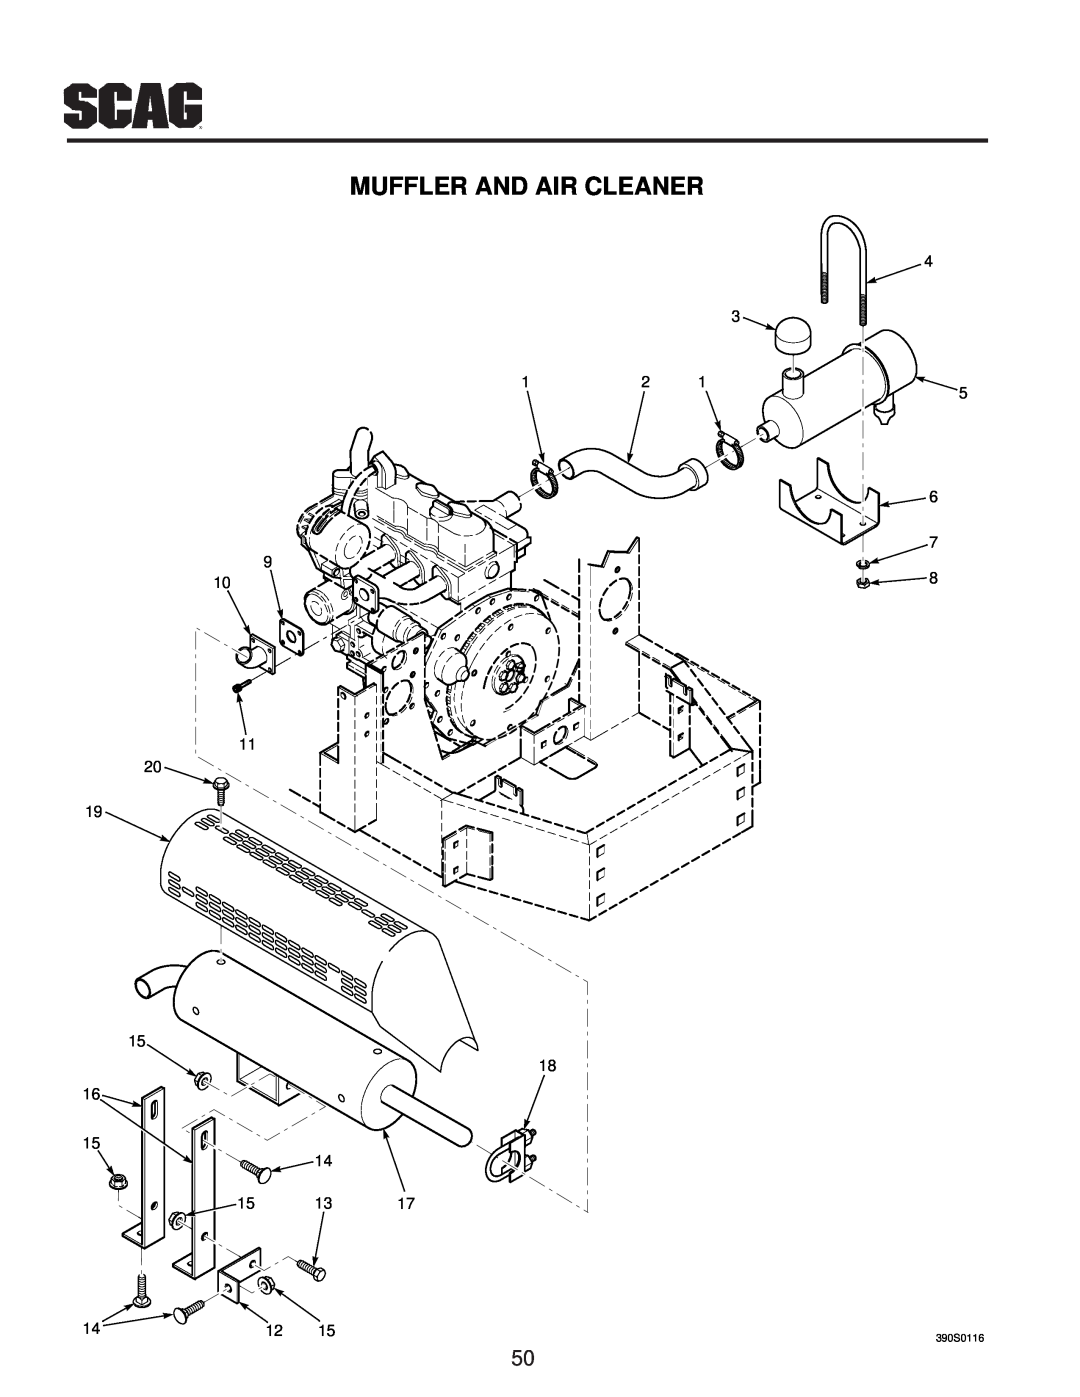 Scag Power Equipment MAG manual Muffler And Air Cleaner, 15 13, 390S0116 